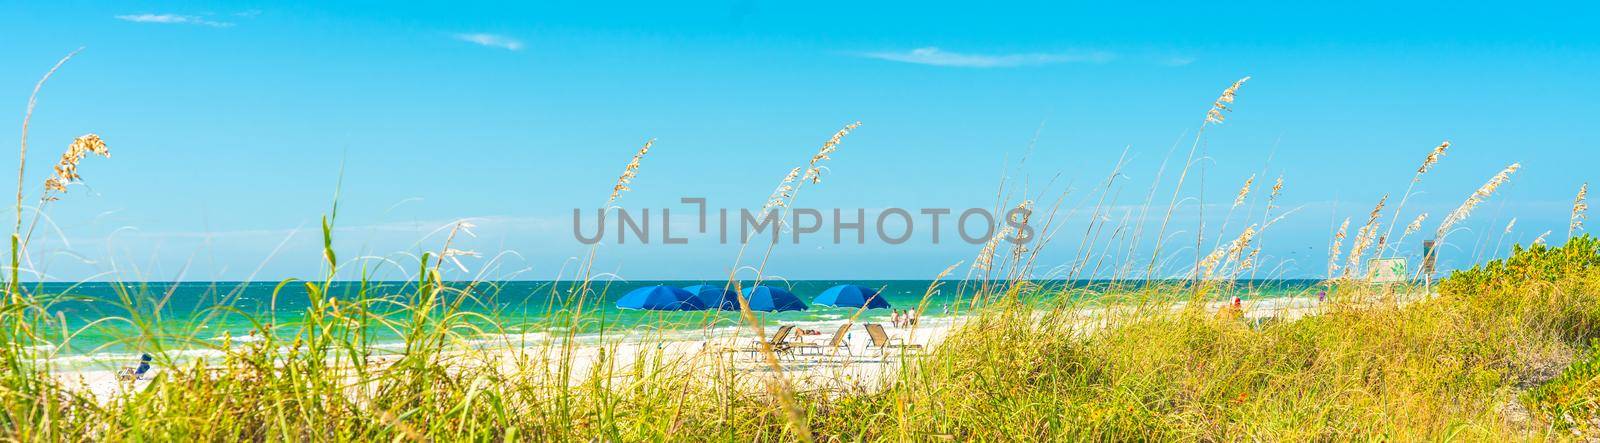 Panorama sunny beach with grass and blue sky in Florida by Mariakray